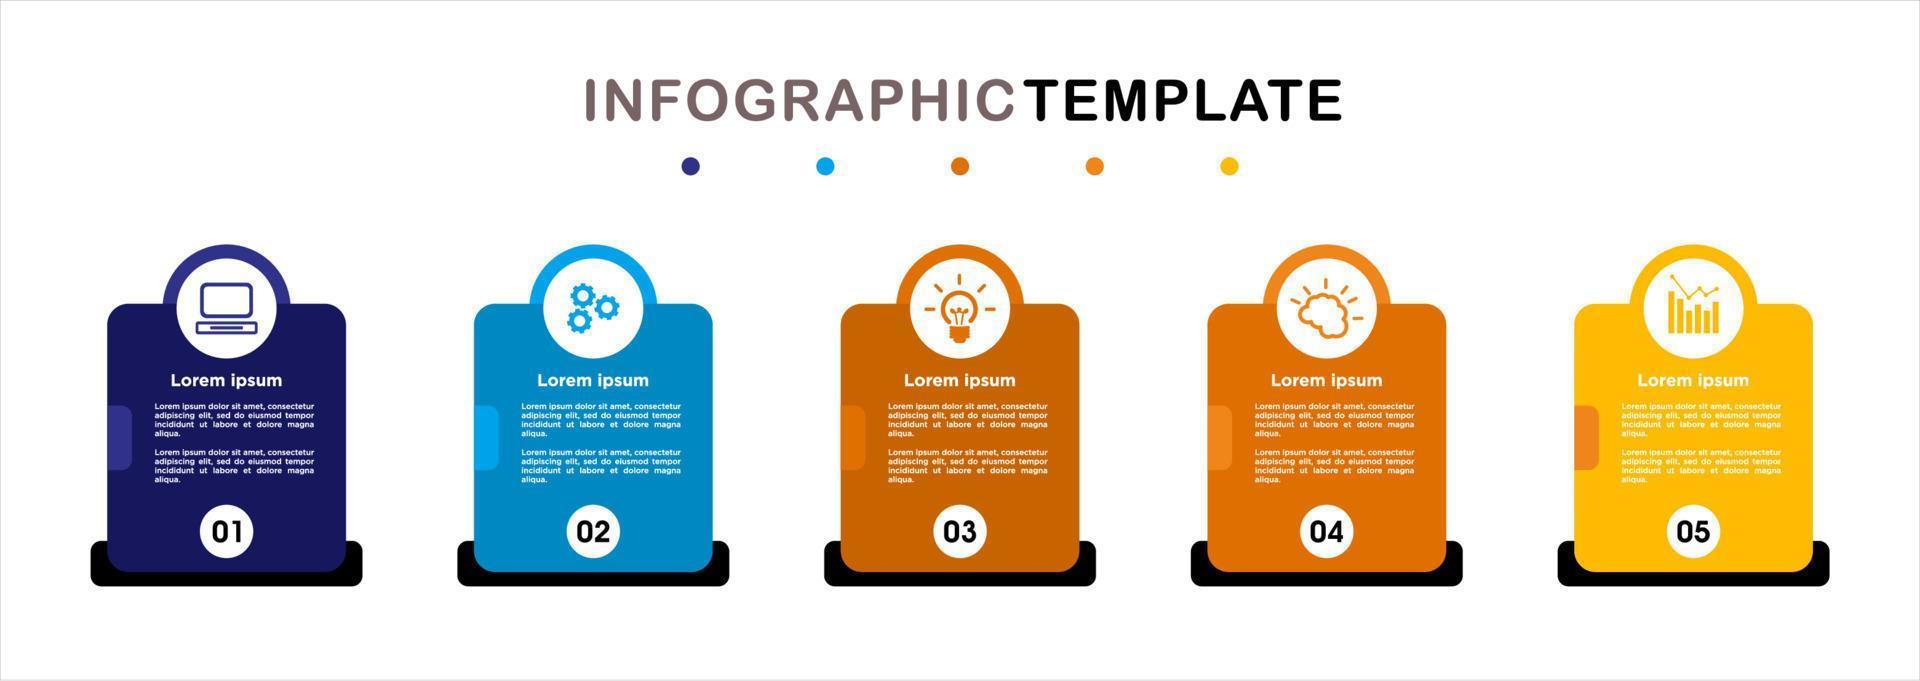 Professional steps infographic vector